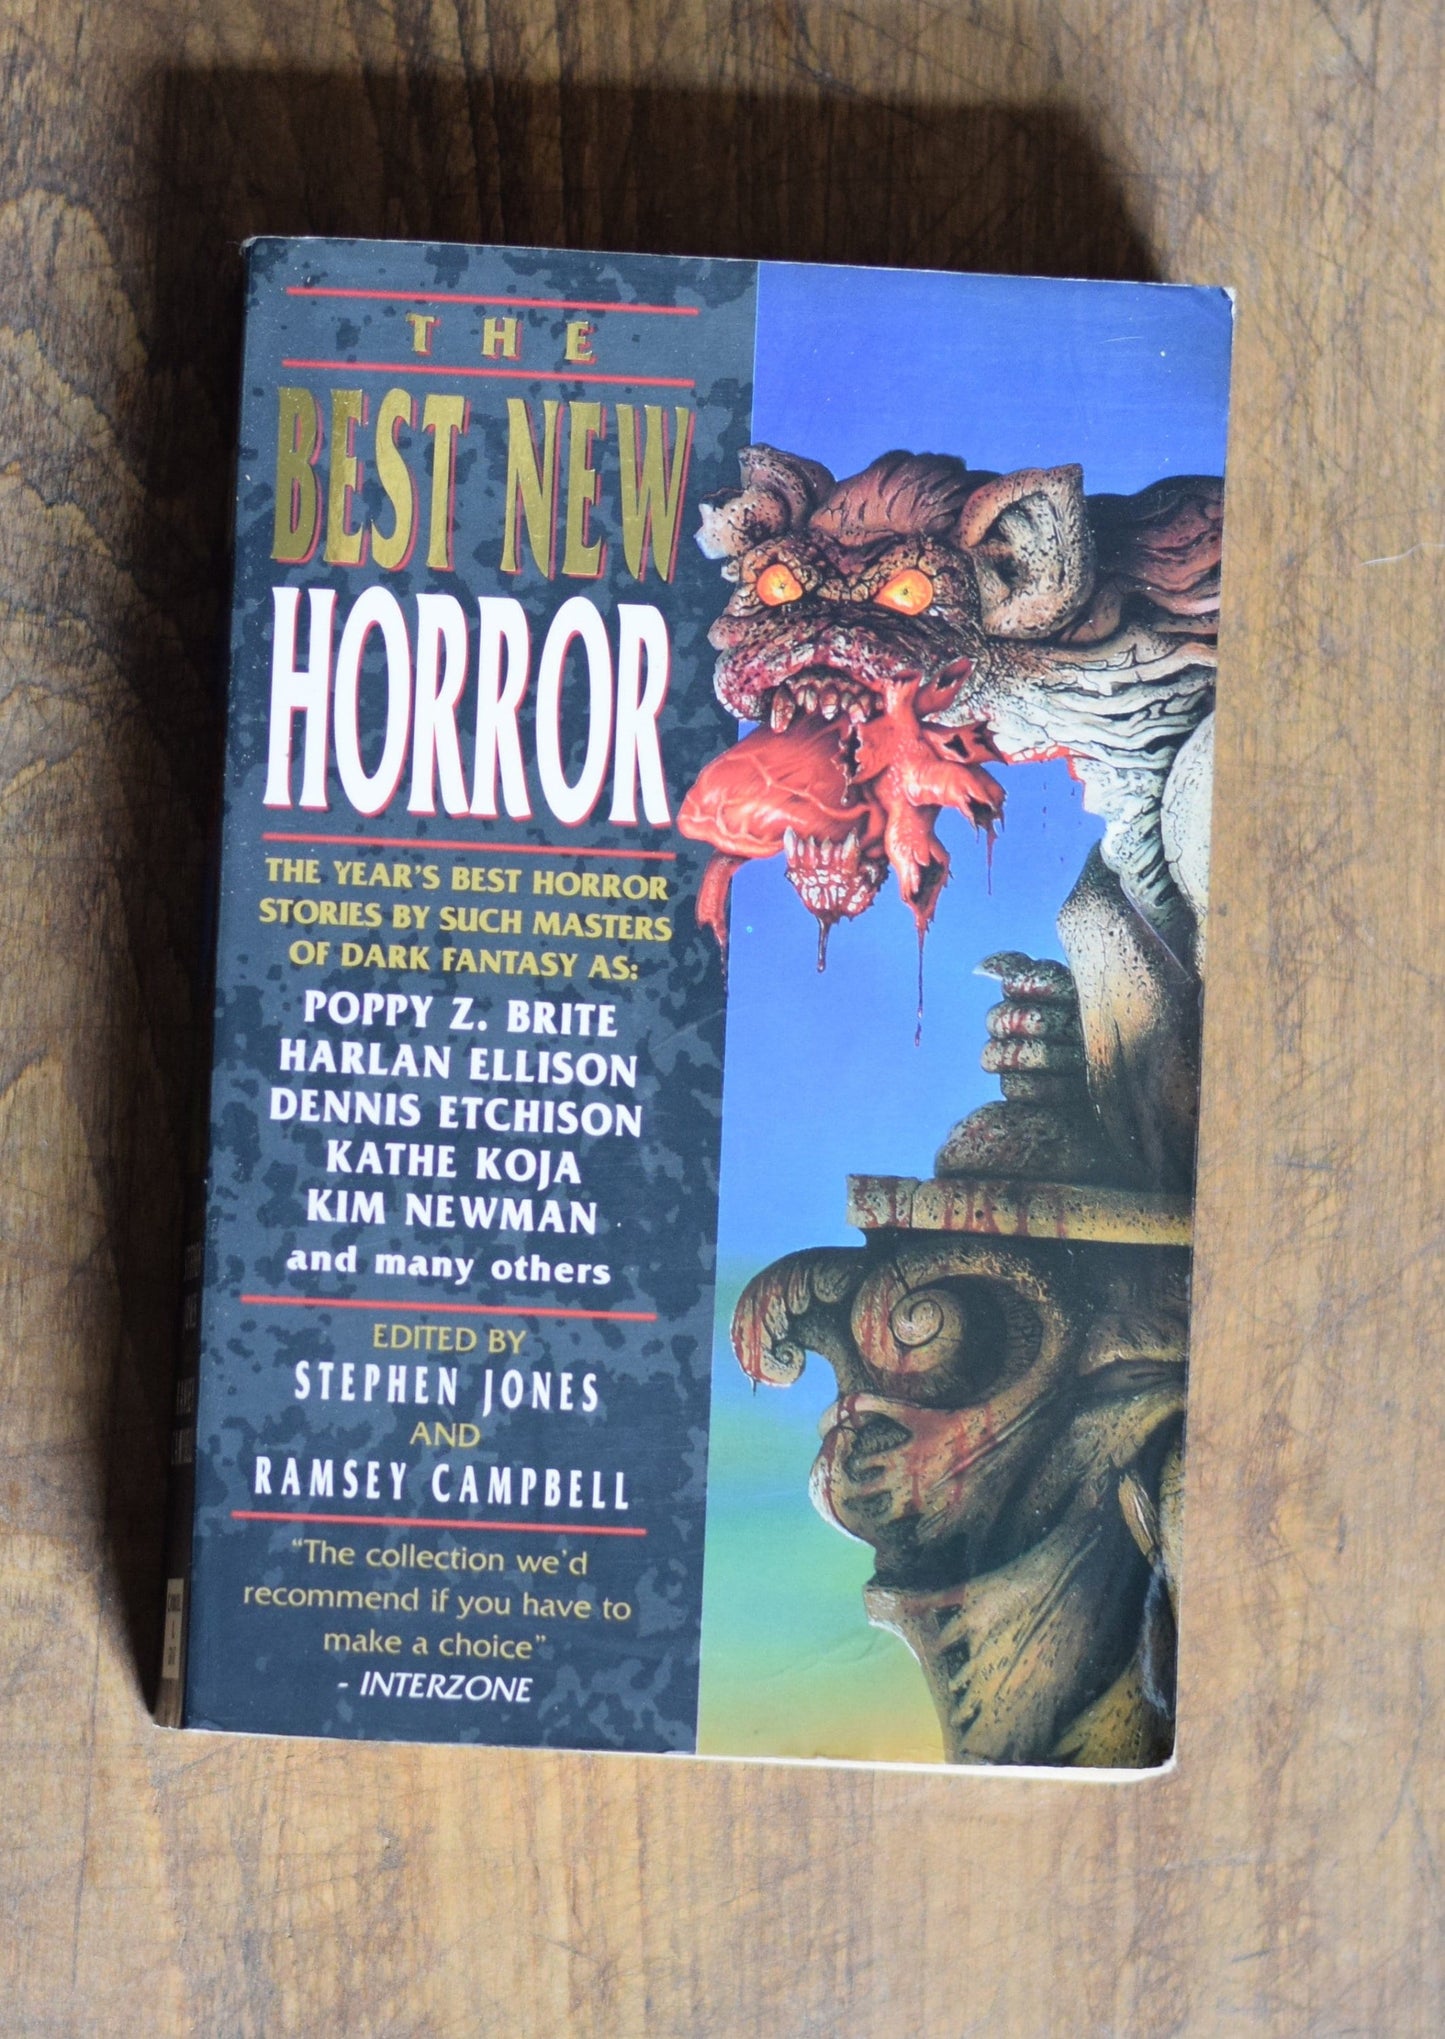 Vintage Horror Paperback: The Best New Horror - Edited by Stephen Jones and Ramsey Campbell FIRST EDITION/PRINTING